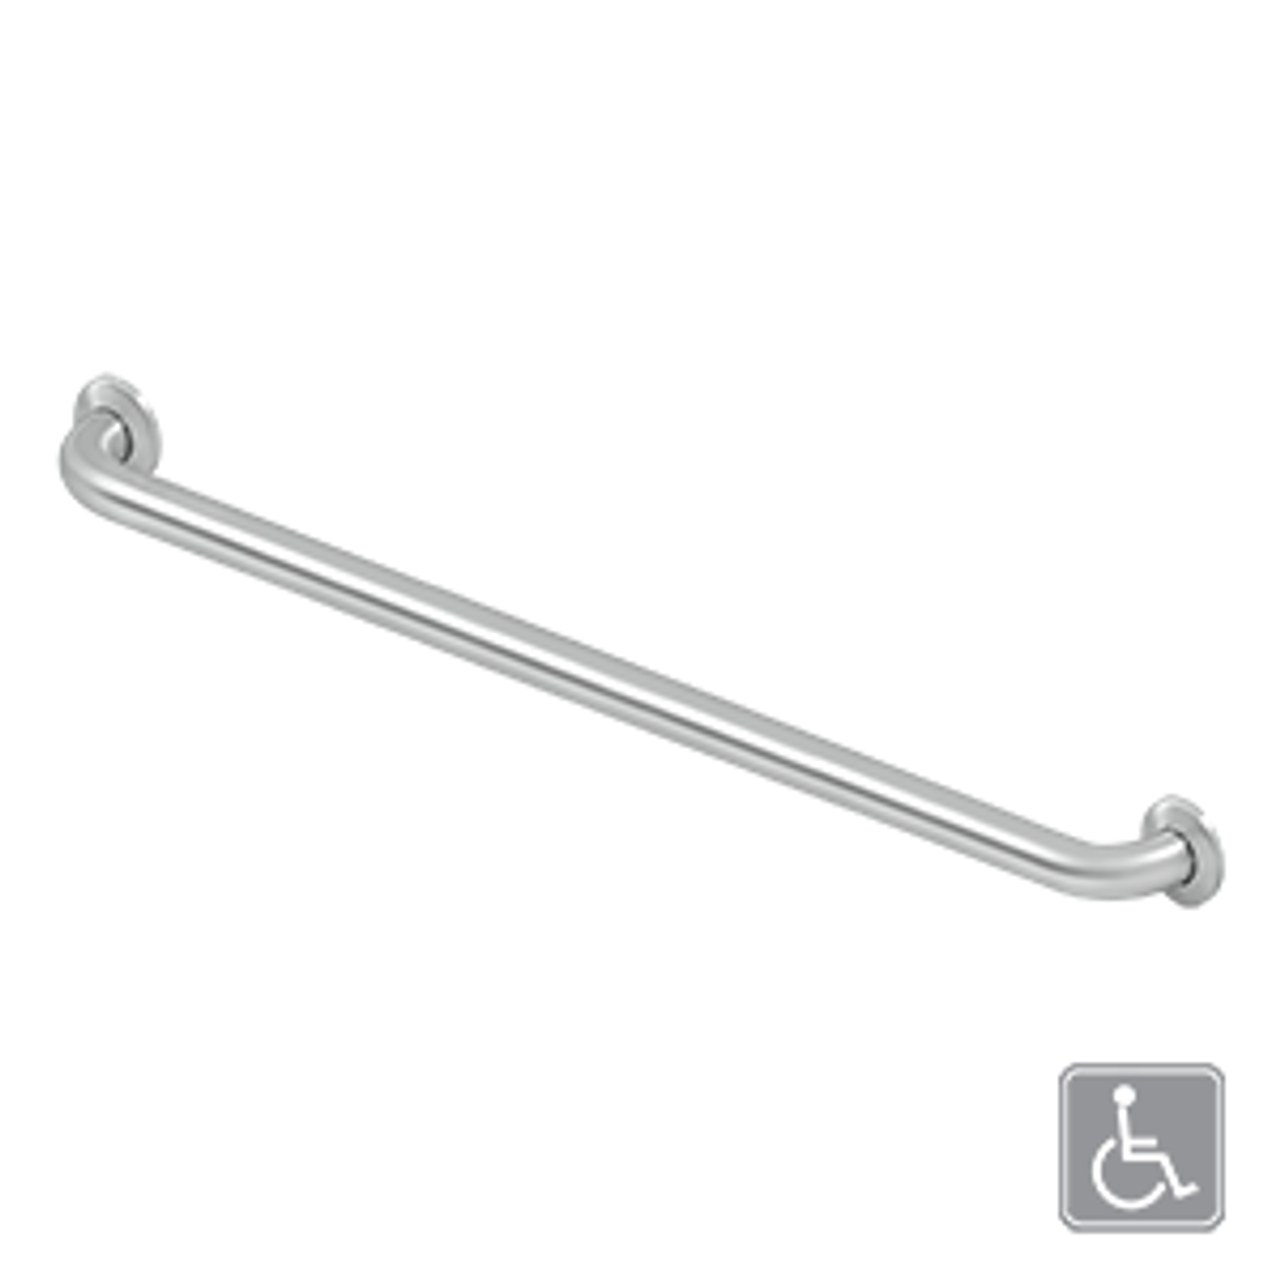 Deltana GB36 36" GRAB BAR, STAINLESS STEEL, CONCEALED SCREW